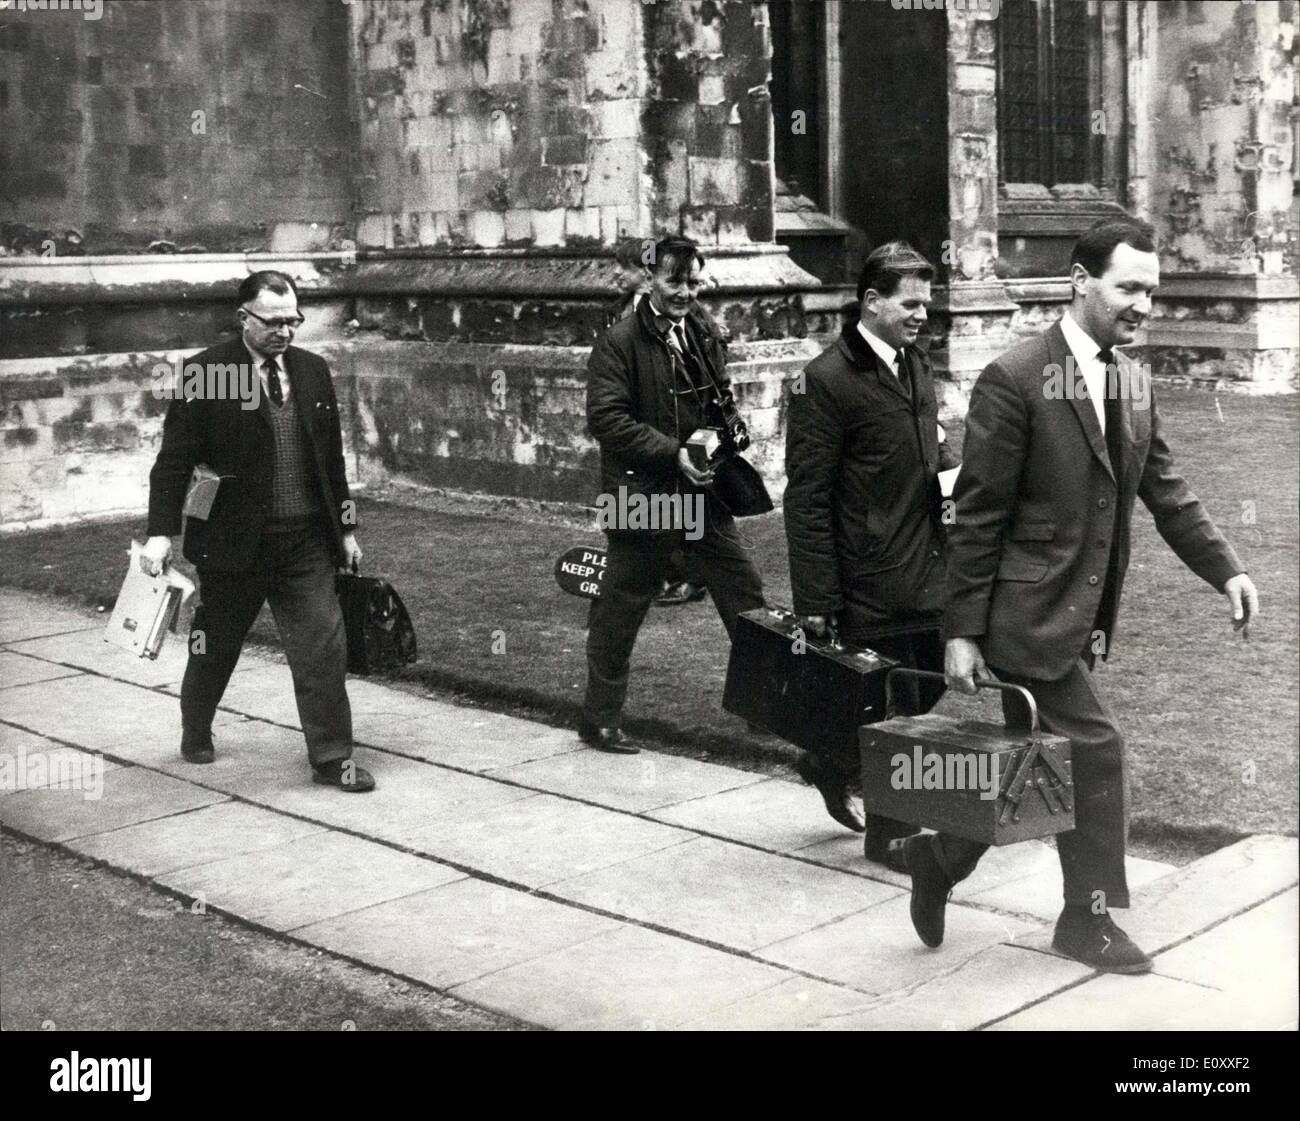 Mar. 16, 1968 - Gang Raid Canterbury Cathedral : A gang broke into Canterbury Cathedral early yesterday and stole antique silver worth ?17,000. One of the stolen items was a 15th century Italian processional cross worth ?5,000. The gang got into the Cathedral by forcing a gate into the cloisters and smashing through an Oak door. Then they tried to blast open two safes which contain the the cathedral's most valuable treasures, but they were uncleared the cathedral until a scientist from Scotland Yard's forenslo laboratory made the gelignite safe. Photo shows The C.I.D Stock Photo